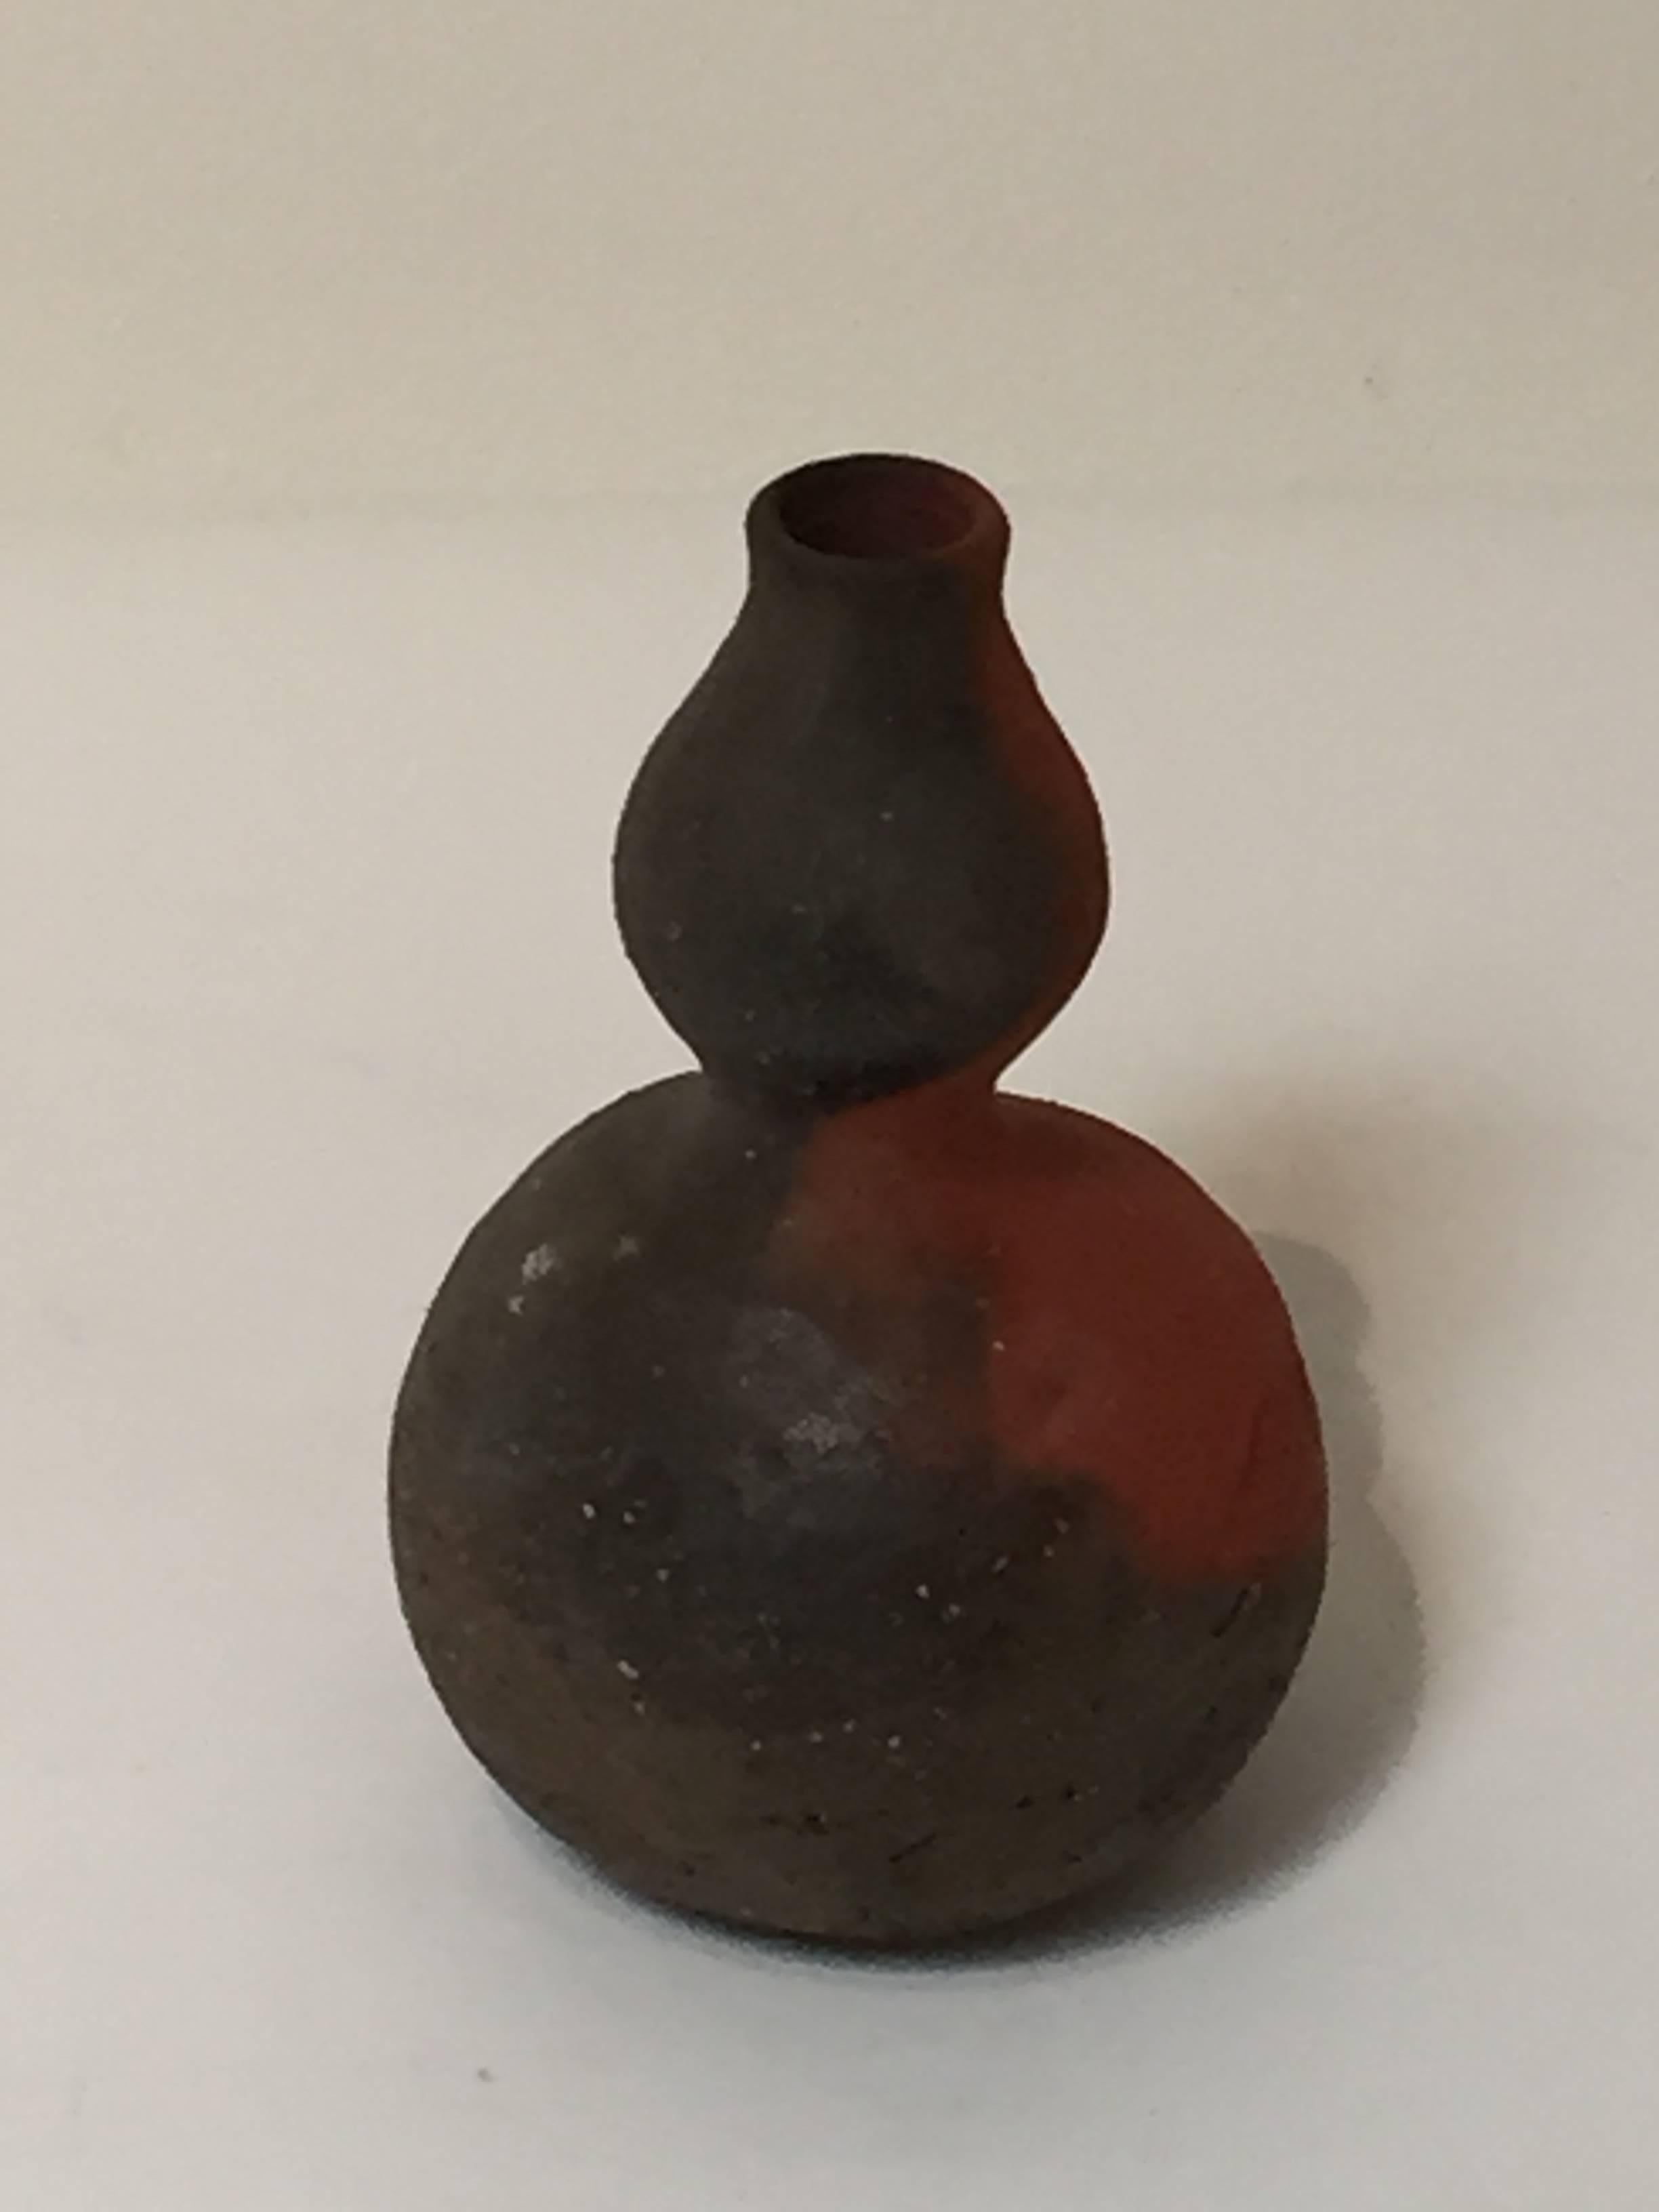 Wood fired sake flask by Japanese Potter Osawa Tsuneo (b.1962)
Includes custom signed box.
Deep rich coloring, and tones, resulting from the ash and fire of the wood klin.